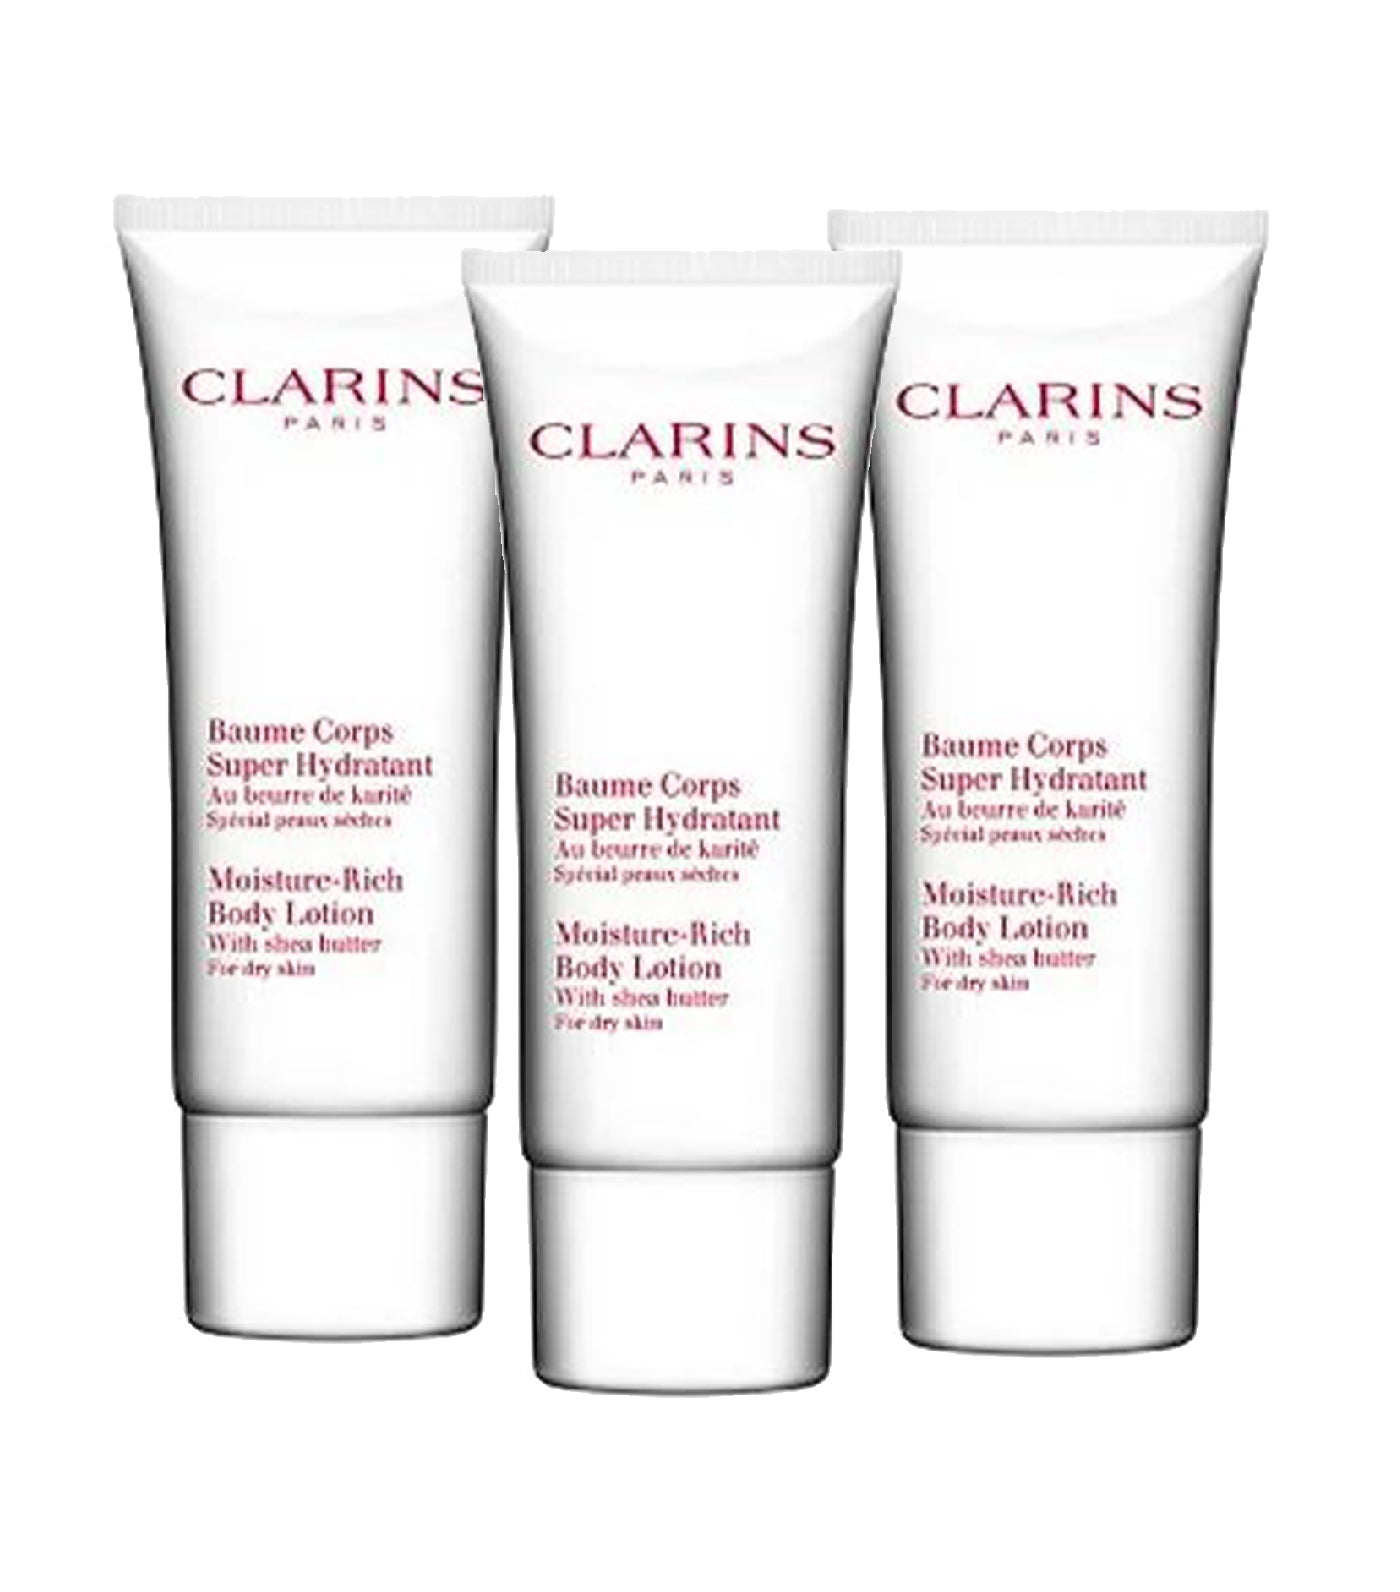 Clarins Free Body Fit Bestseller Set